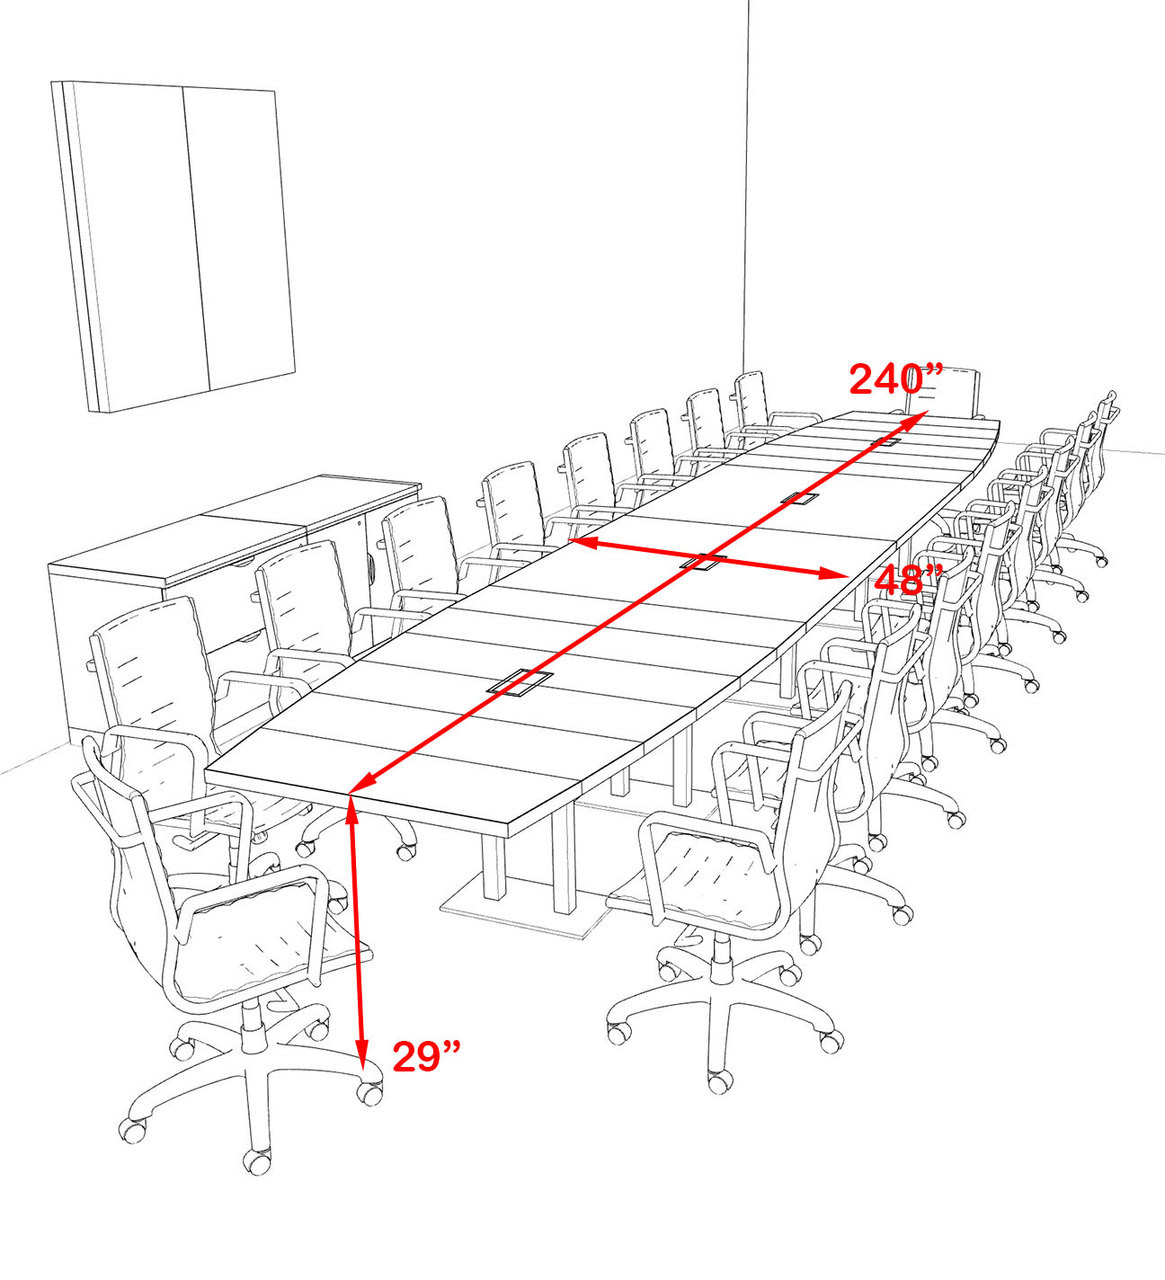 Modern Boat Shaped Steel Leg 20' Feet Conference Table, #OF-CON-CM56